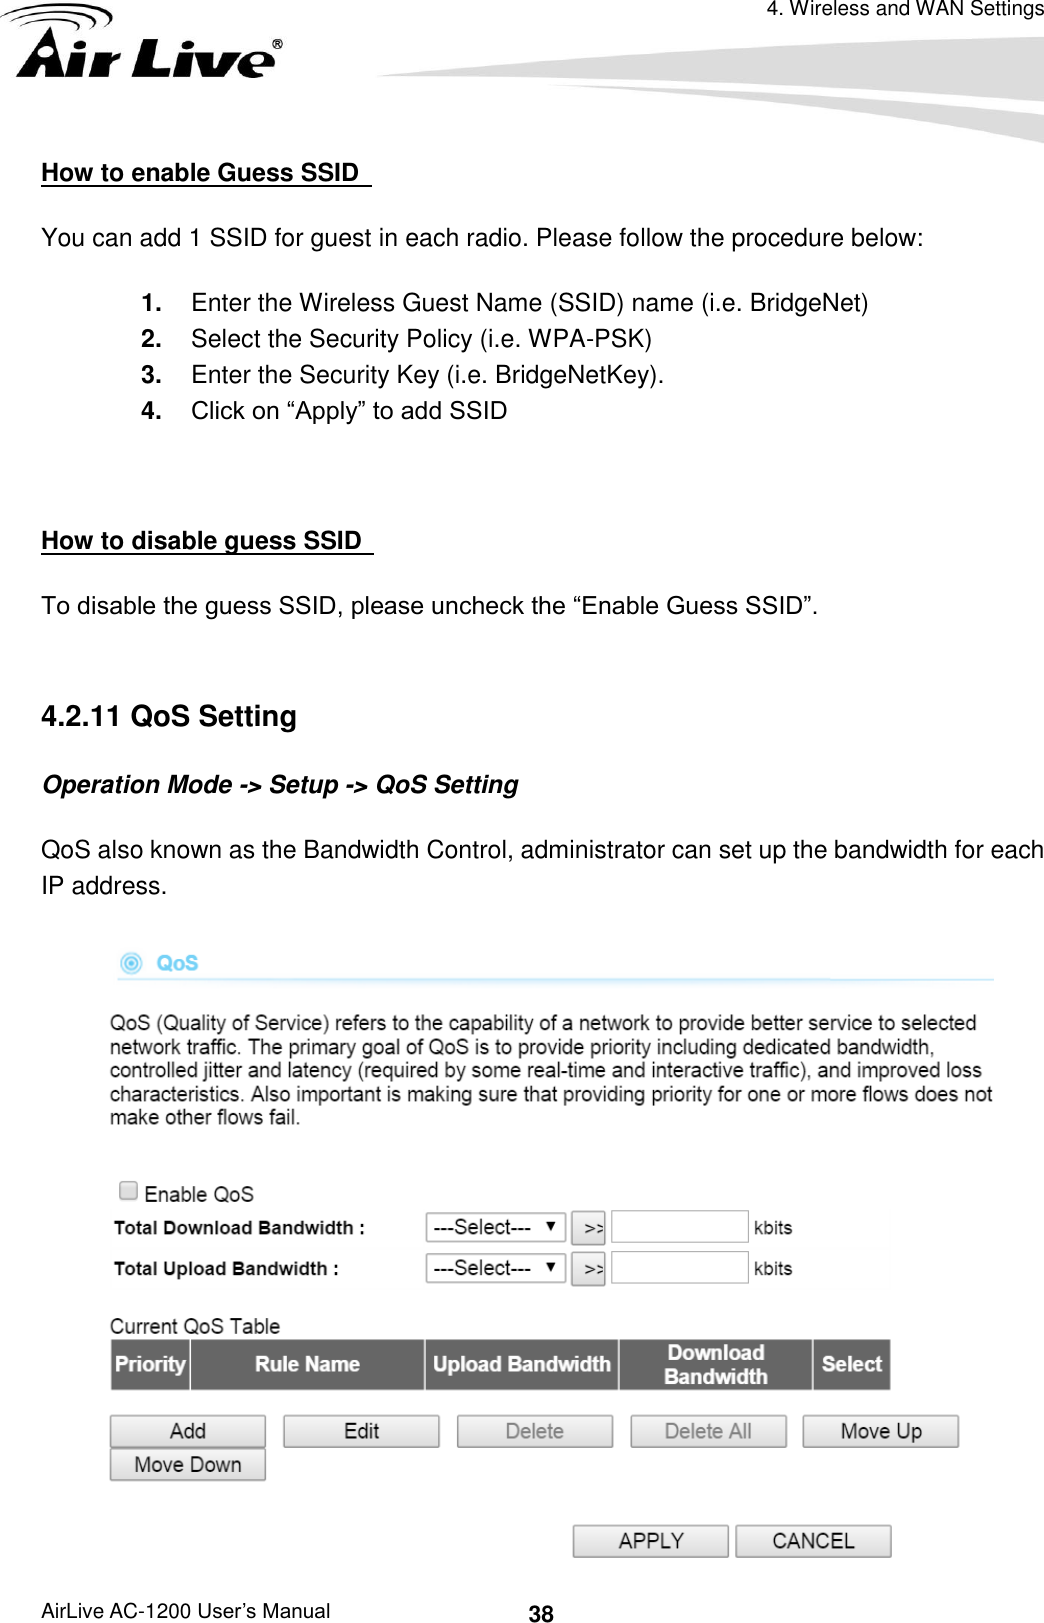 4. Wireless and WAN Settings AirLive AC-1200 User’s Manual 38 How to enable Guess SSID   You can add 1 SSID for guest in each radio. Please follow the procedure below: 1. Enter the Wireless Guest Name (SSID) name (i.e. BridgeNet) 2. Select the Security Policy (i.e. WPA-PSK) 3. Enter the Security Key (i.e. BridgeNetKey). 4. Click on “Apply” to add SSID  How to disable guess SSID   To disable the guess SSID, please uncheck the “Enable Guess SSID”.  4.2.11 QoS Setting Operation Mode -&gt; Setup -&gt; QoS Setting QoS also known as the Bandwidth Control, administrator can set up the bandwidth for each IP address.    